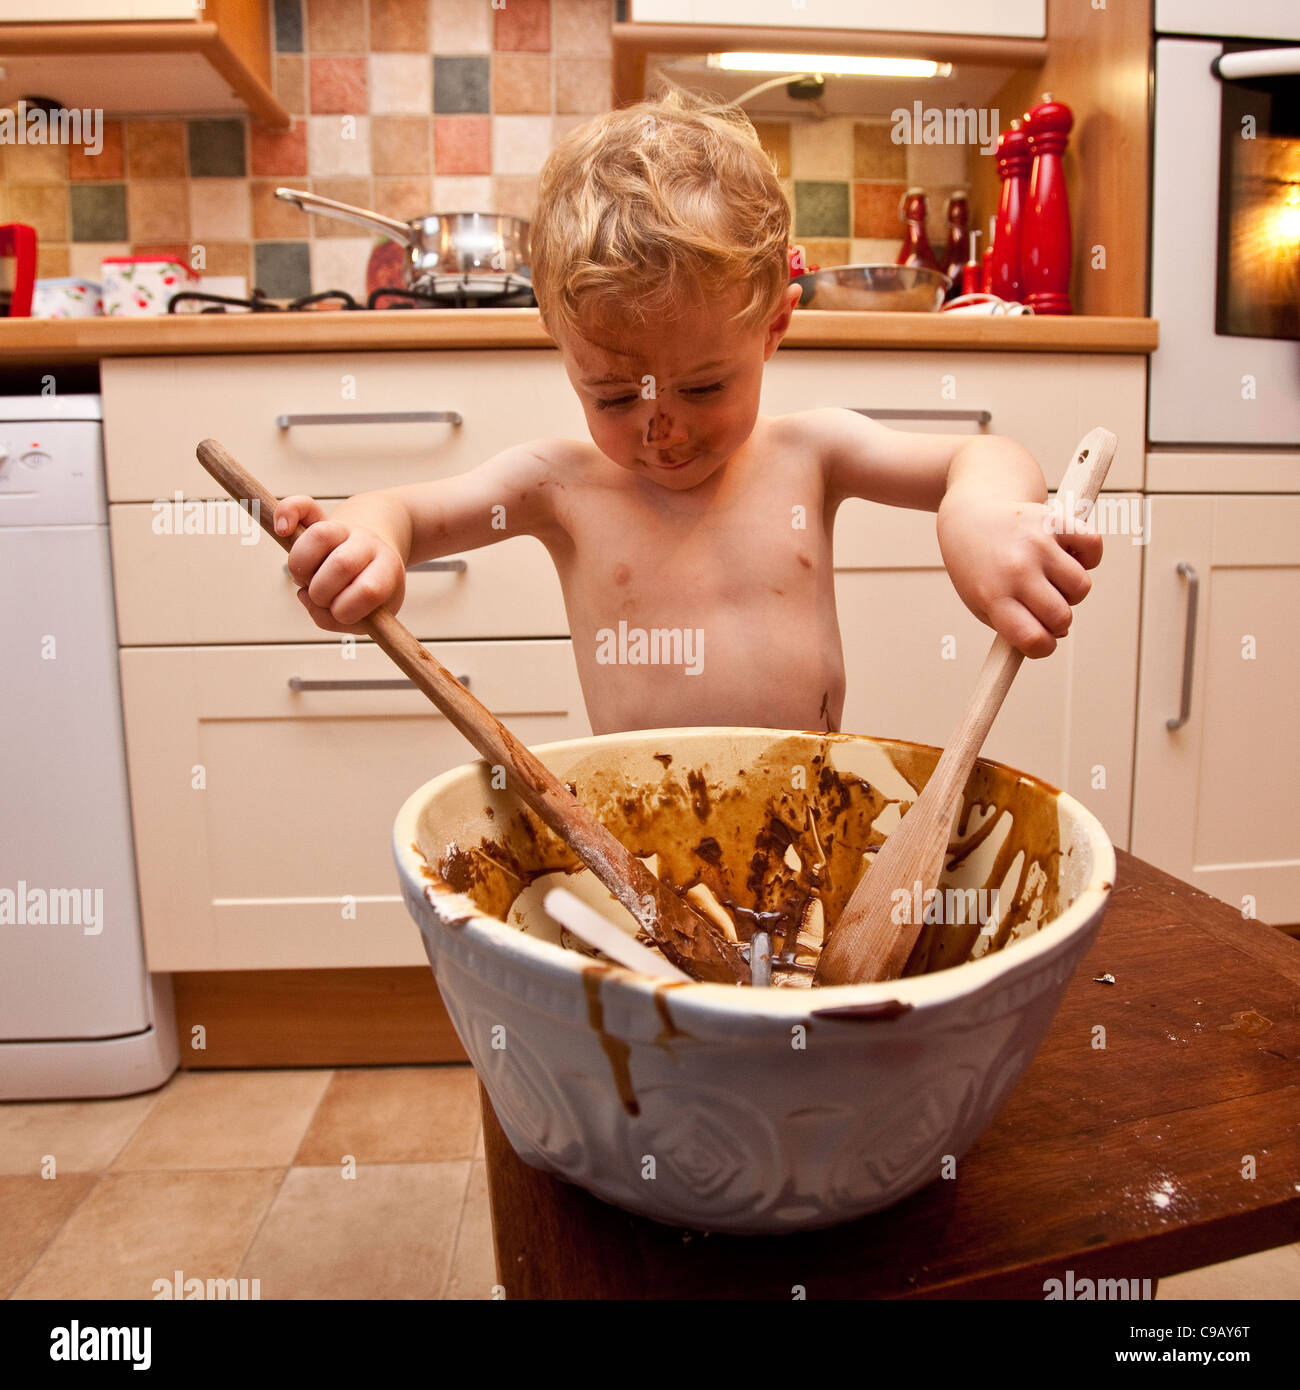 Young boy (2 1/2 Years old)  making chocolate cake, Hampshire, England. Stock Photo